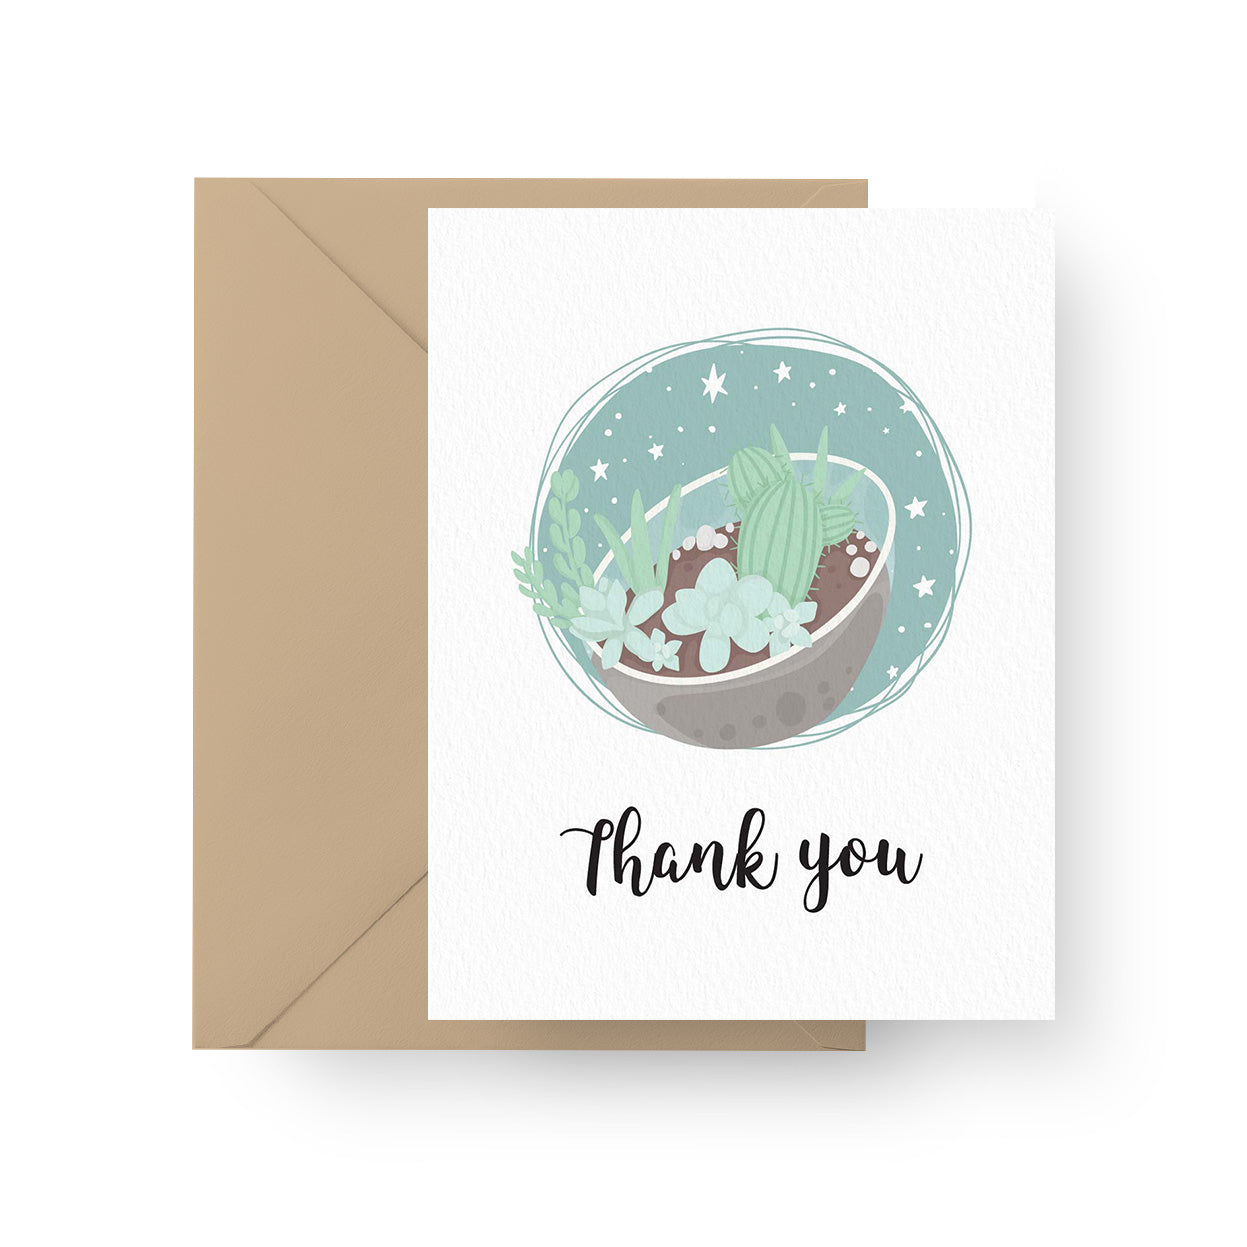 Thank you card for employee, Employee Appreciation Cards for sale, Corporate succulent gift with thank you card, Thank You Live Succulent Gift Box for sale, Succulent thank you cards with kraft envelope, Succulent thank you cards to suit any occasion, Staff Appreciation Card ideas, Thank you note to employee for a job well done, Thank you card for employee appreciation